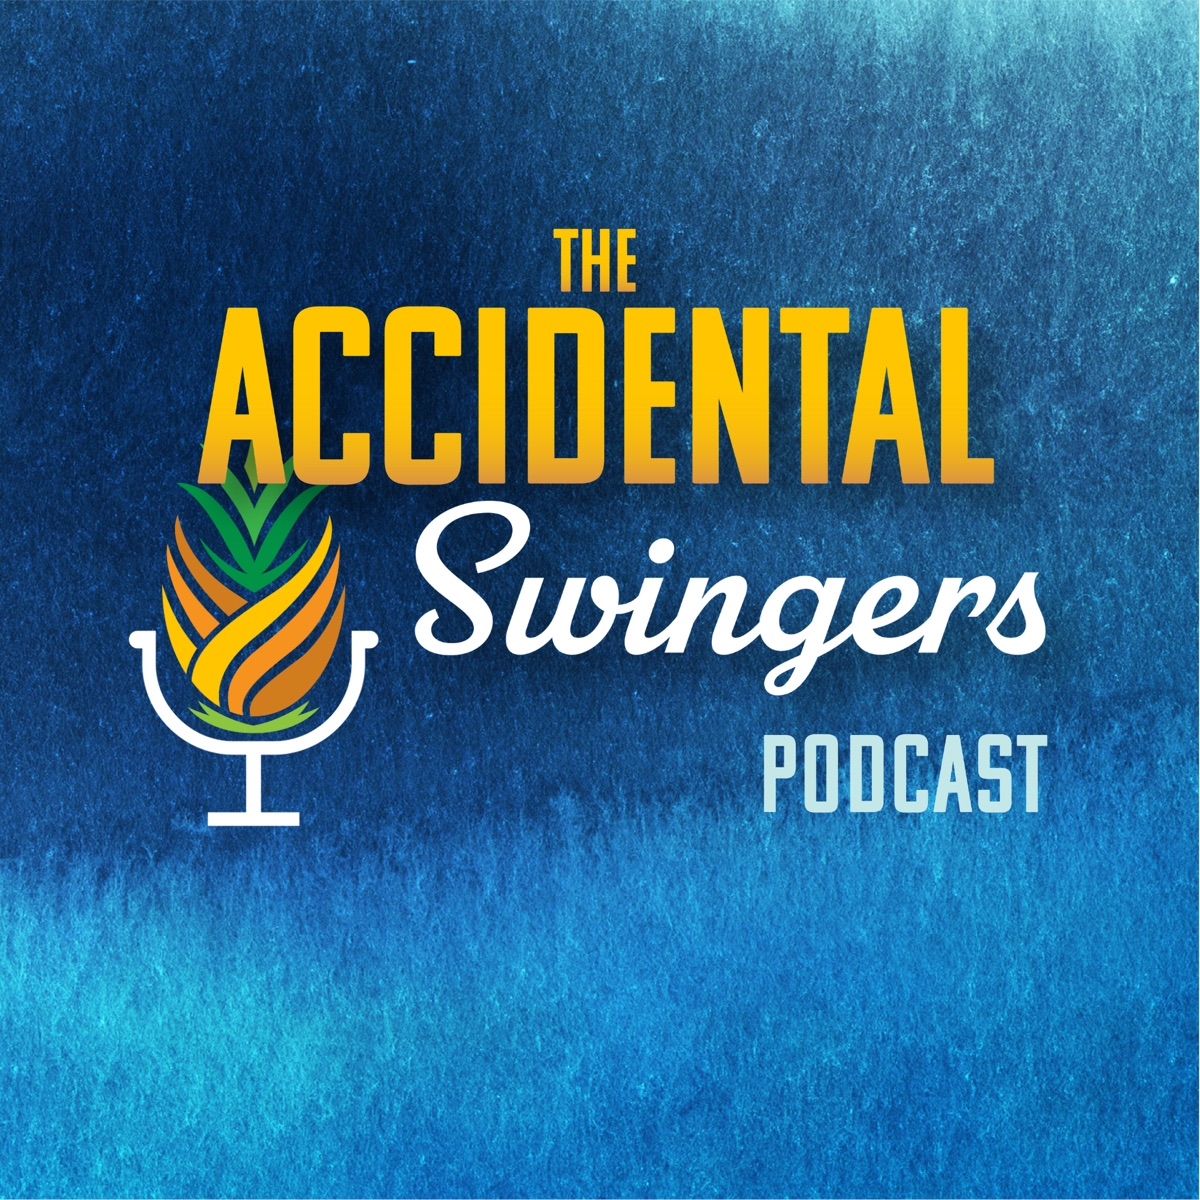 Accidental Swingers – Podcast image